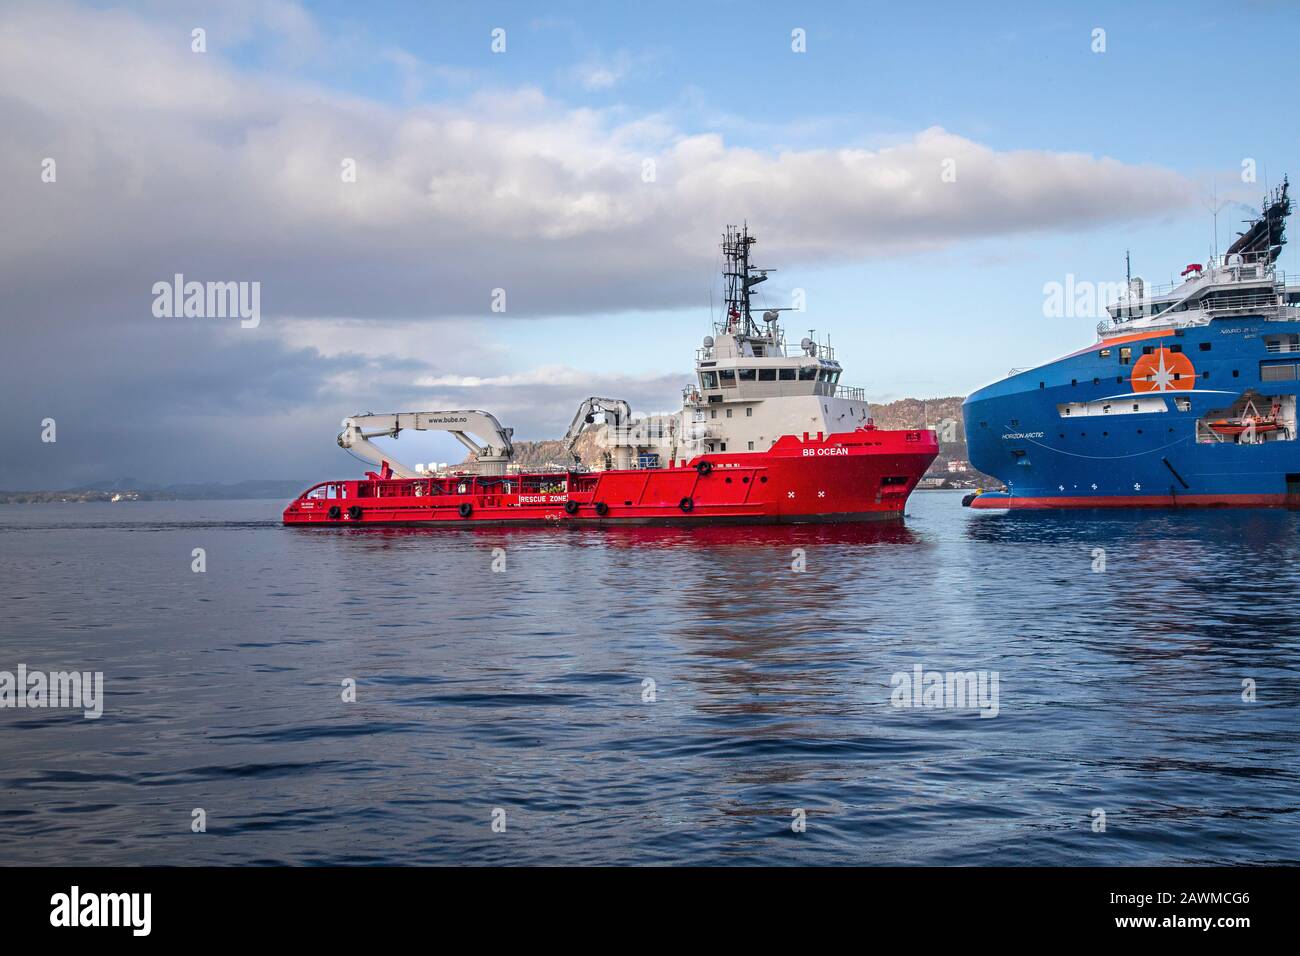 Offshore supply AHTS vessel BB Ocean arriving the port of Bergen, Norway. Meeting a much larger offshore supply vessel, the Horizon Arctic. A rainy, d Stock Photo